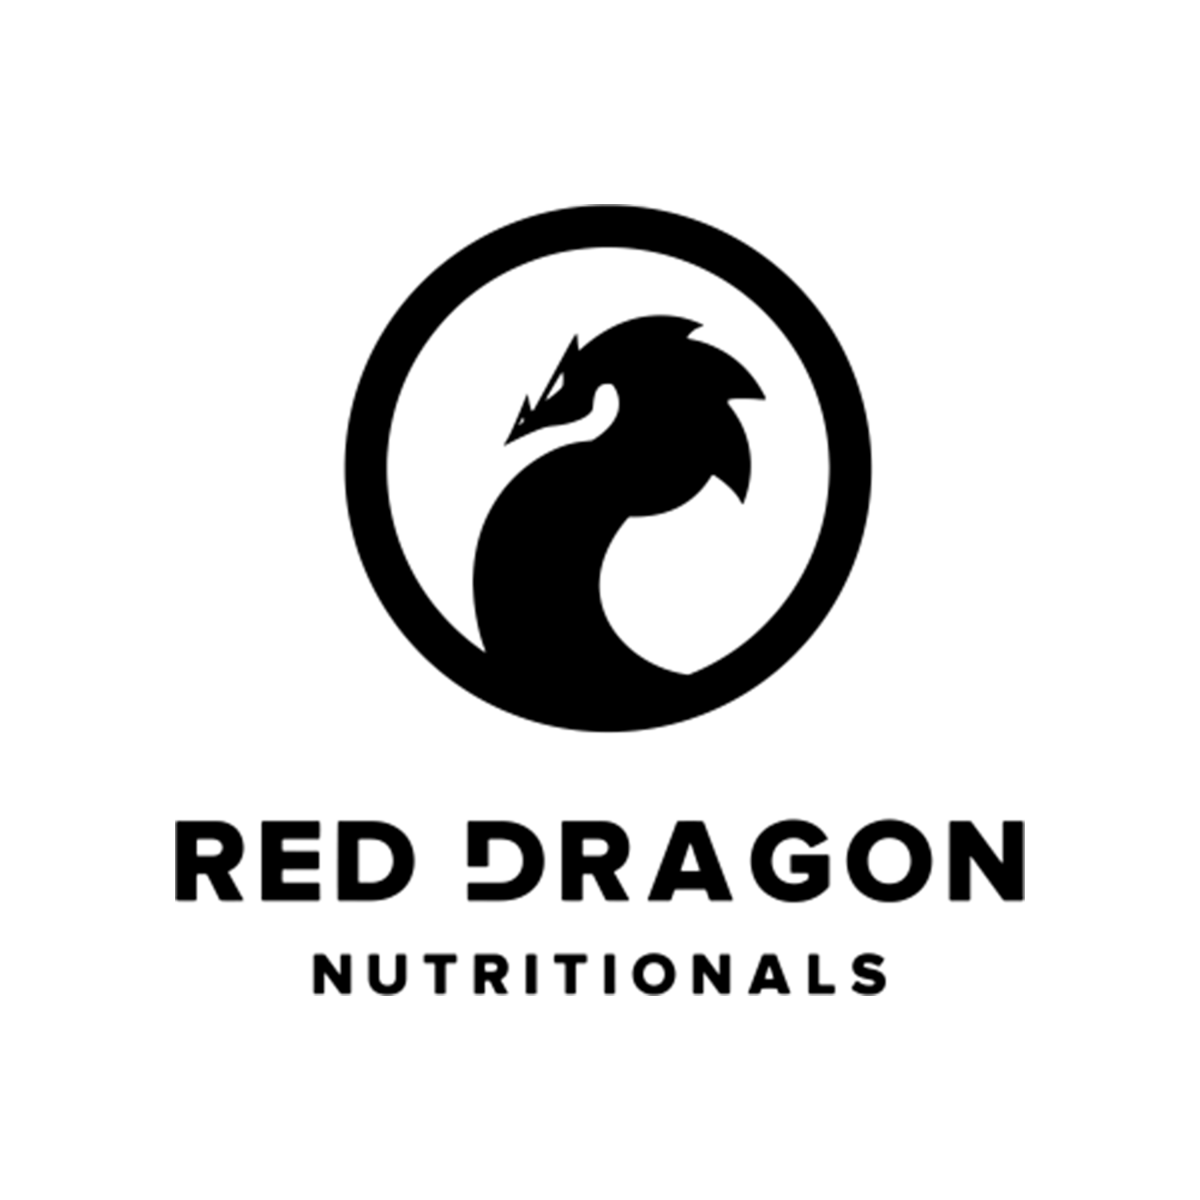 Red Dragon Nutritionals - MJ Fitness